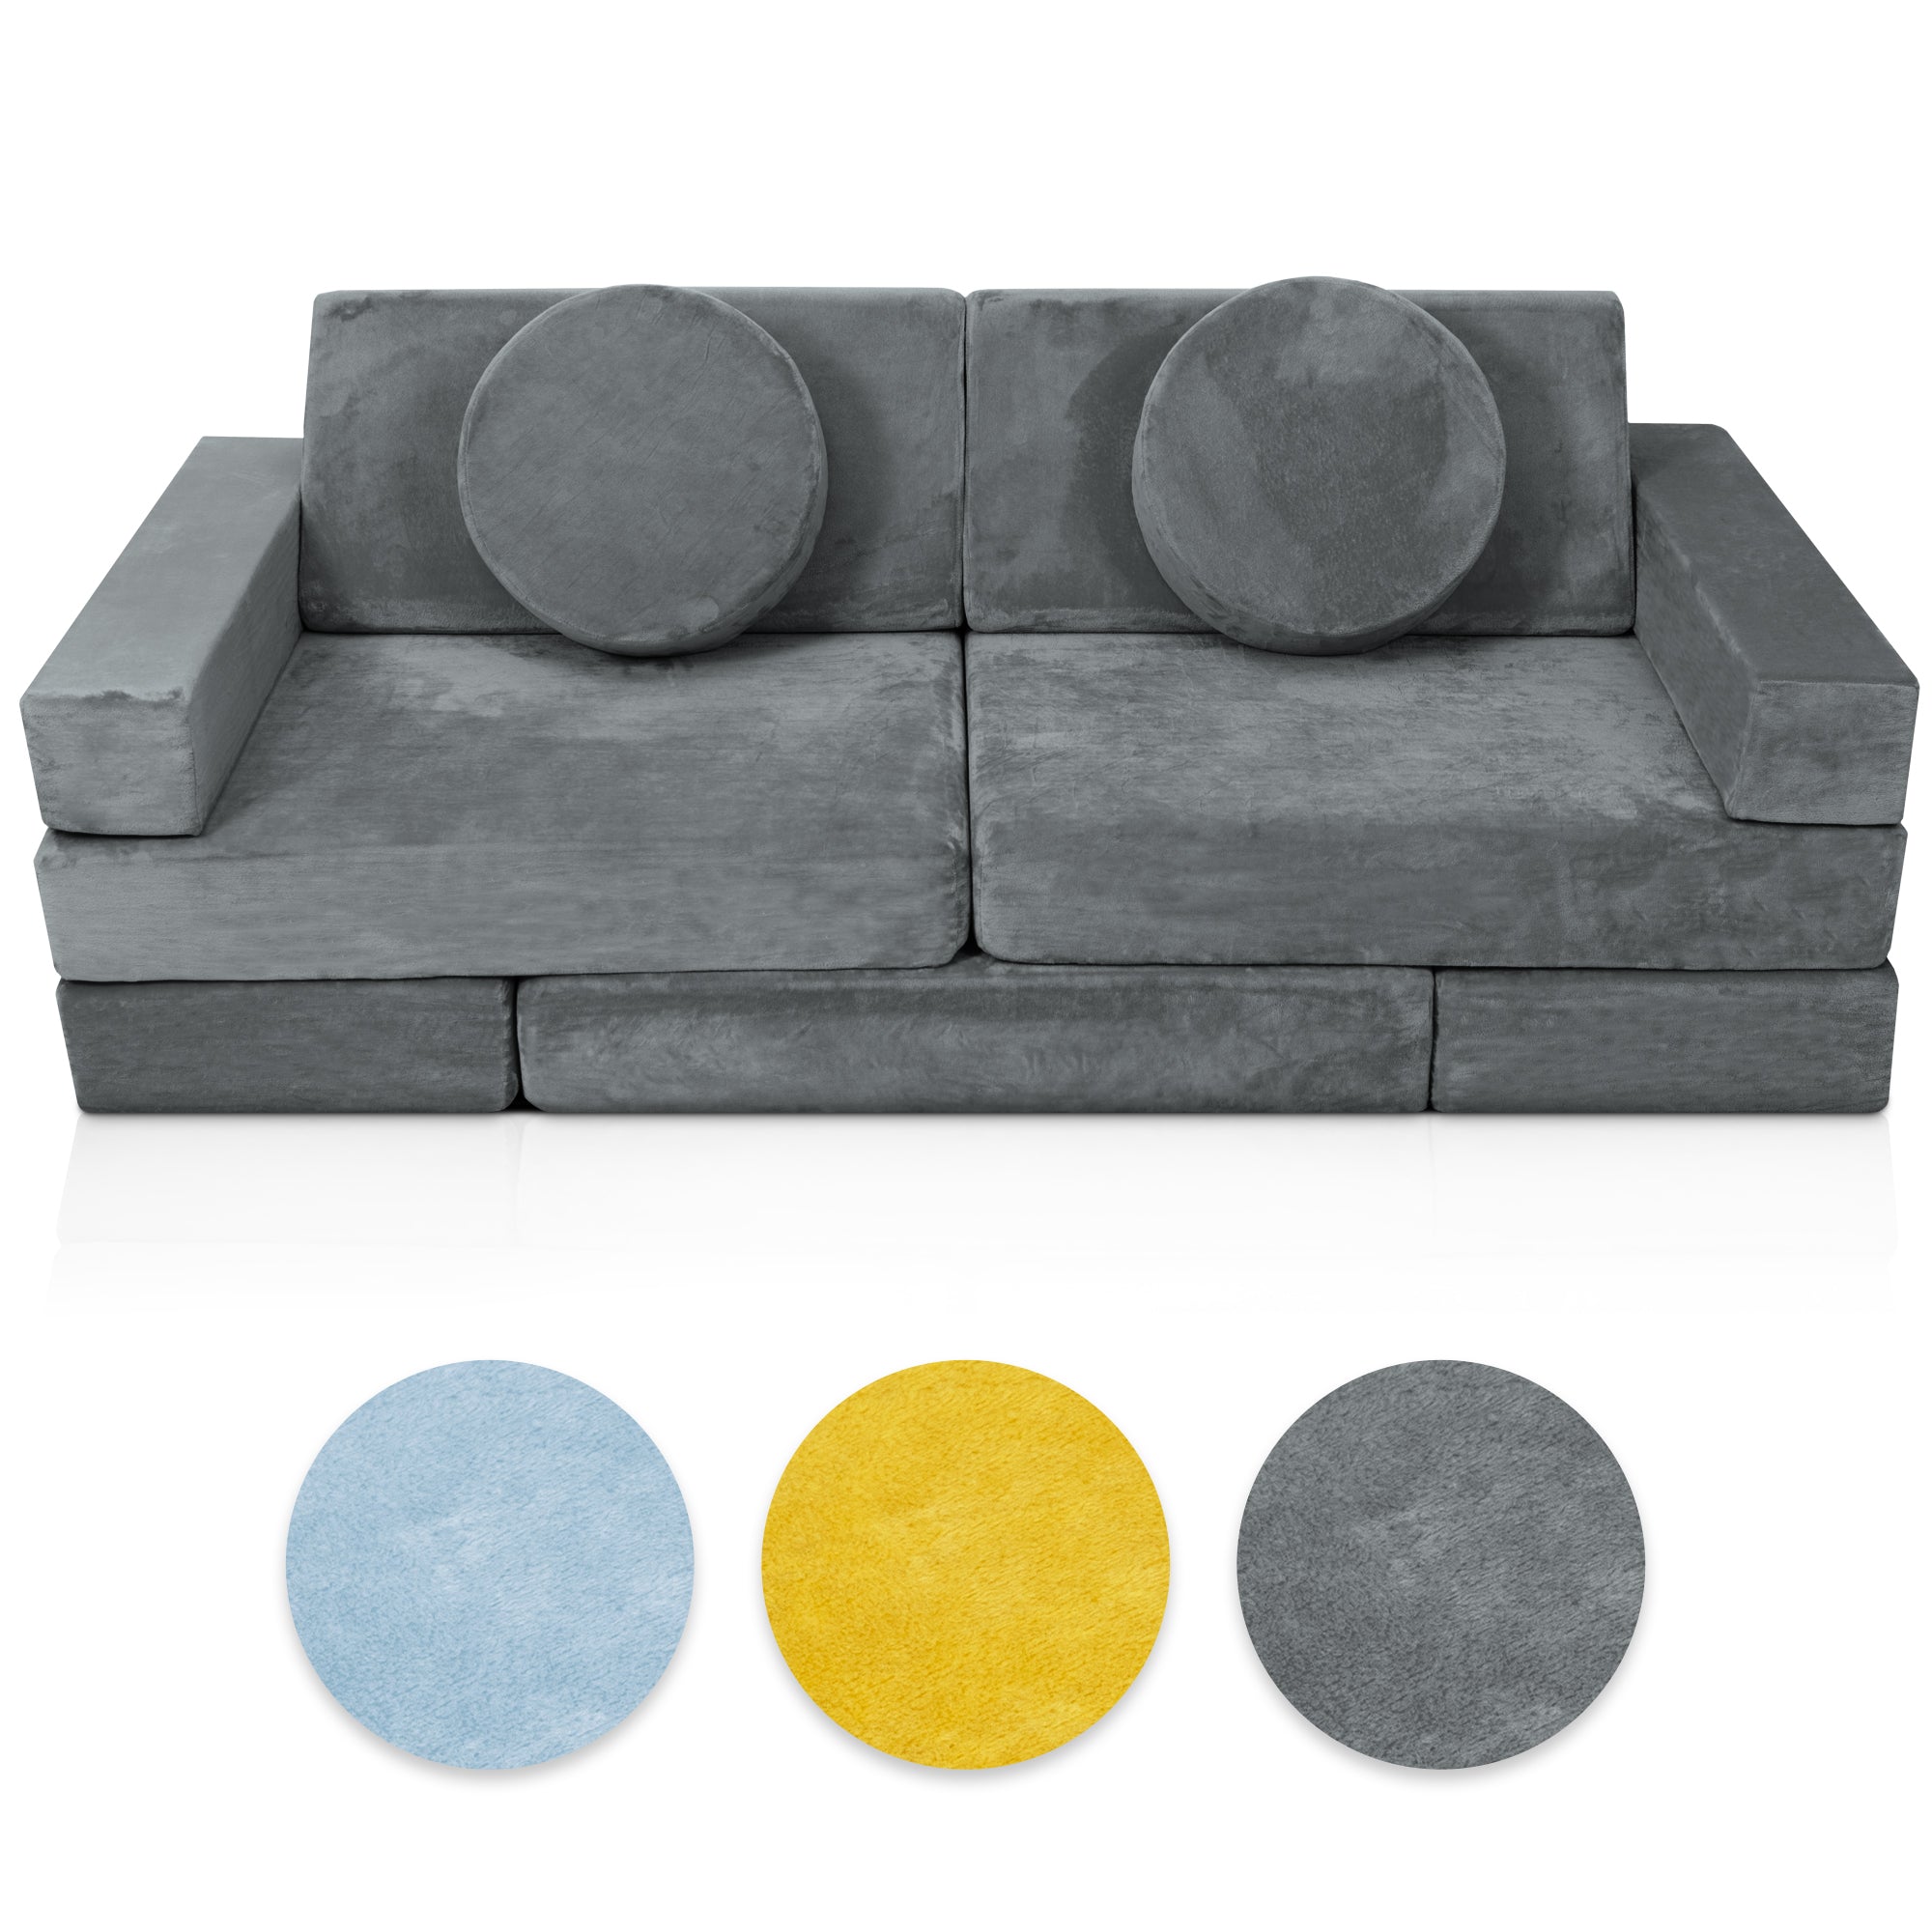 Lunix 14pcs Modular Kids Play Couch - Cover Set Only for LX15, Gray, Foam not Included